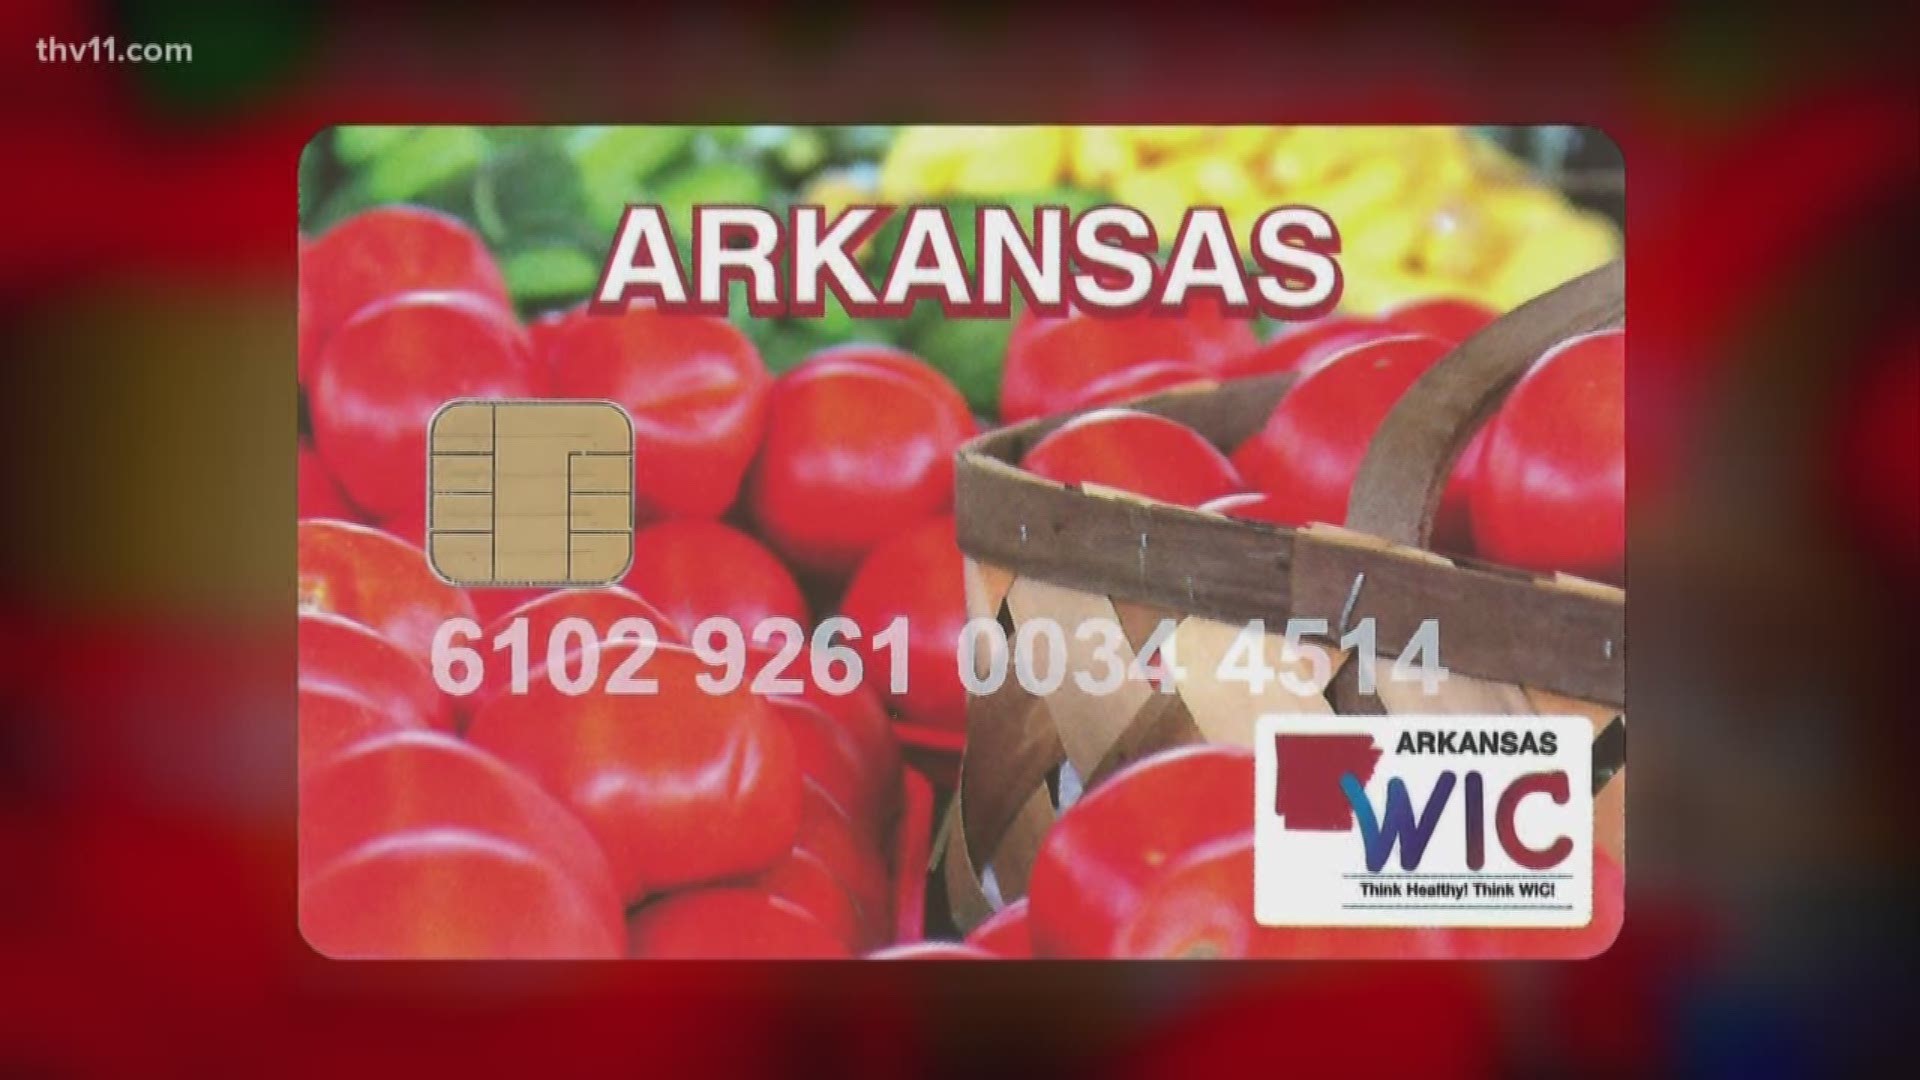 You can use it just like a regular debit card to check out at the grocery store, which makes the process much easier.